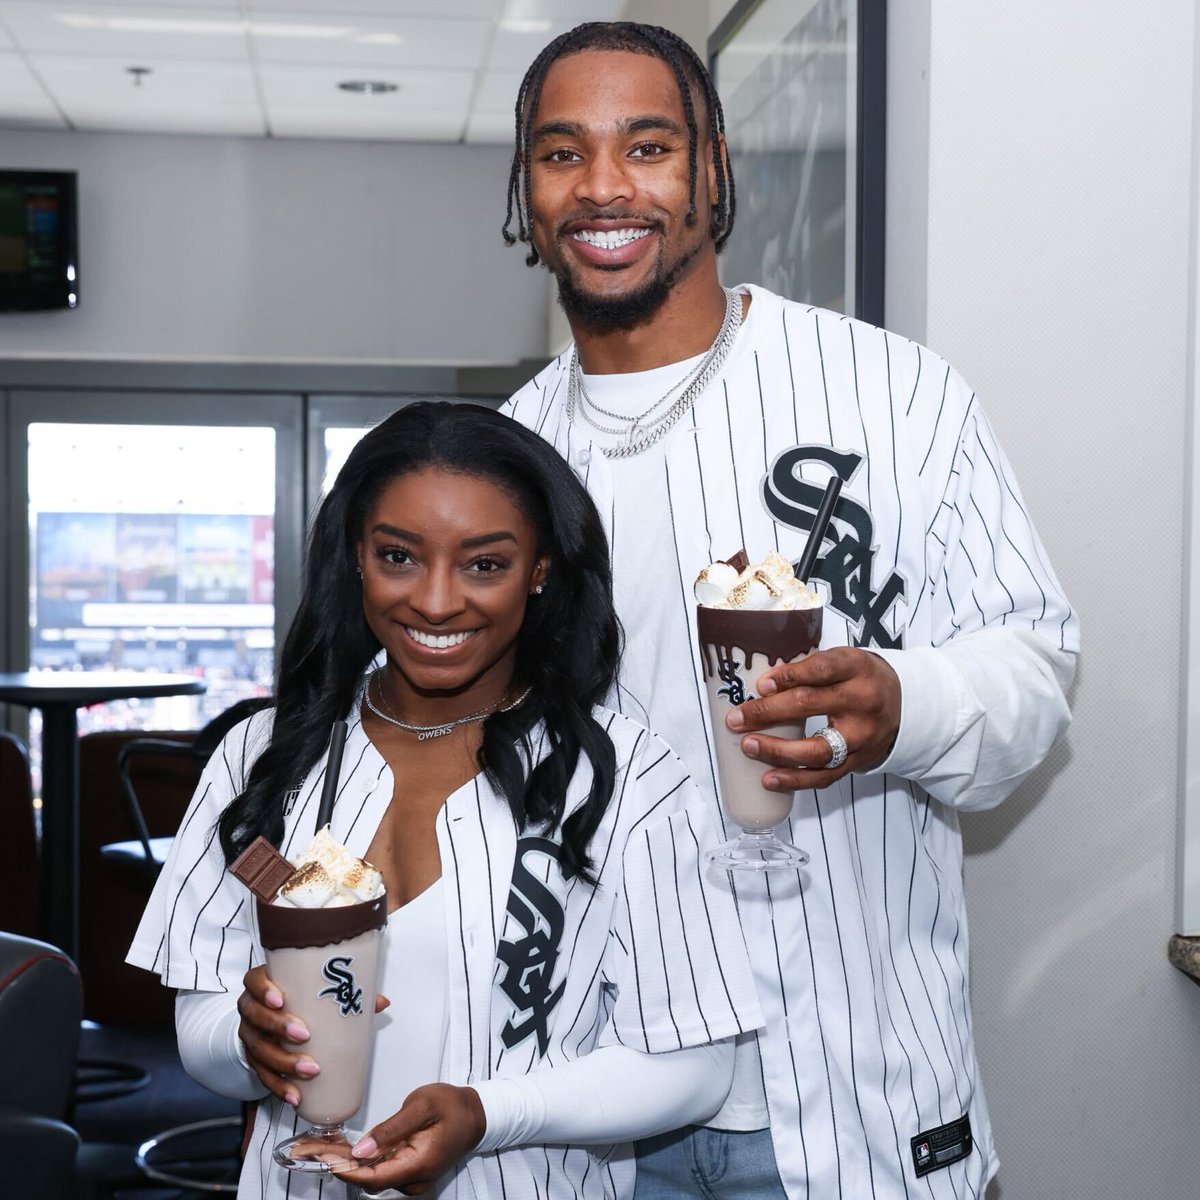 Simone Biles and her husband Jonathan Owens are at the White Sox game today and they tried the 16-ounce Campfire Milkshake 😂 (via @WhiteSox)